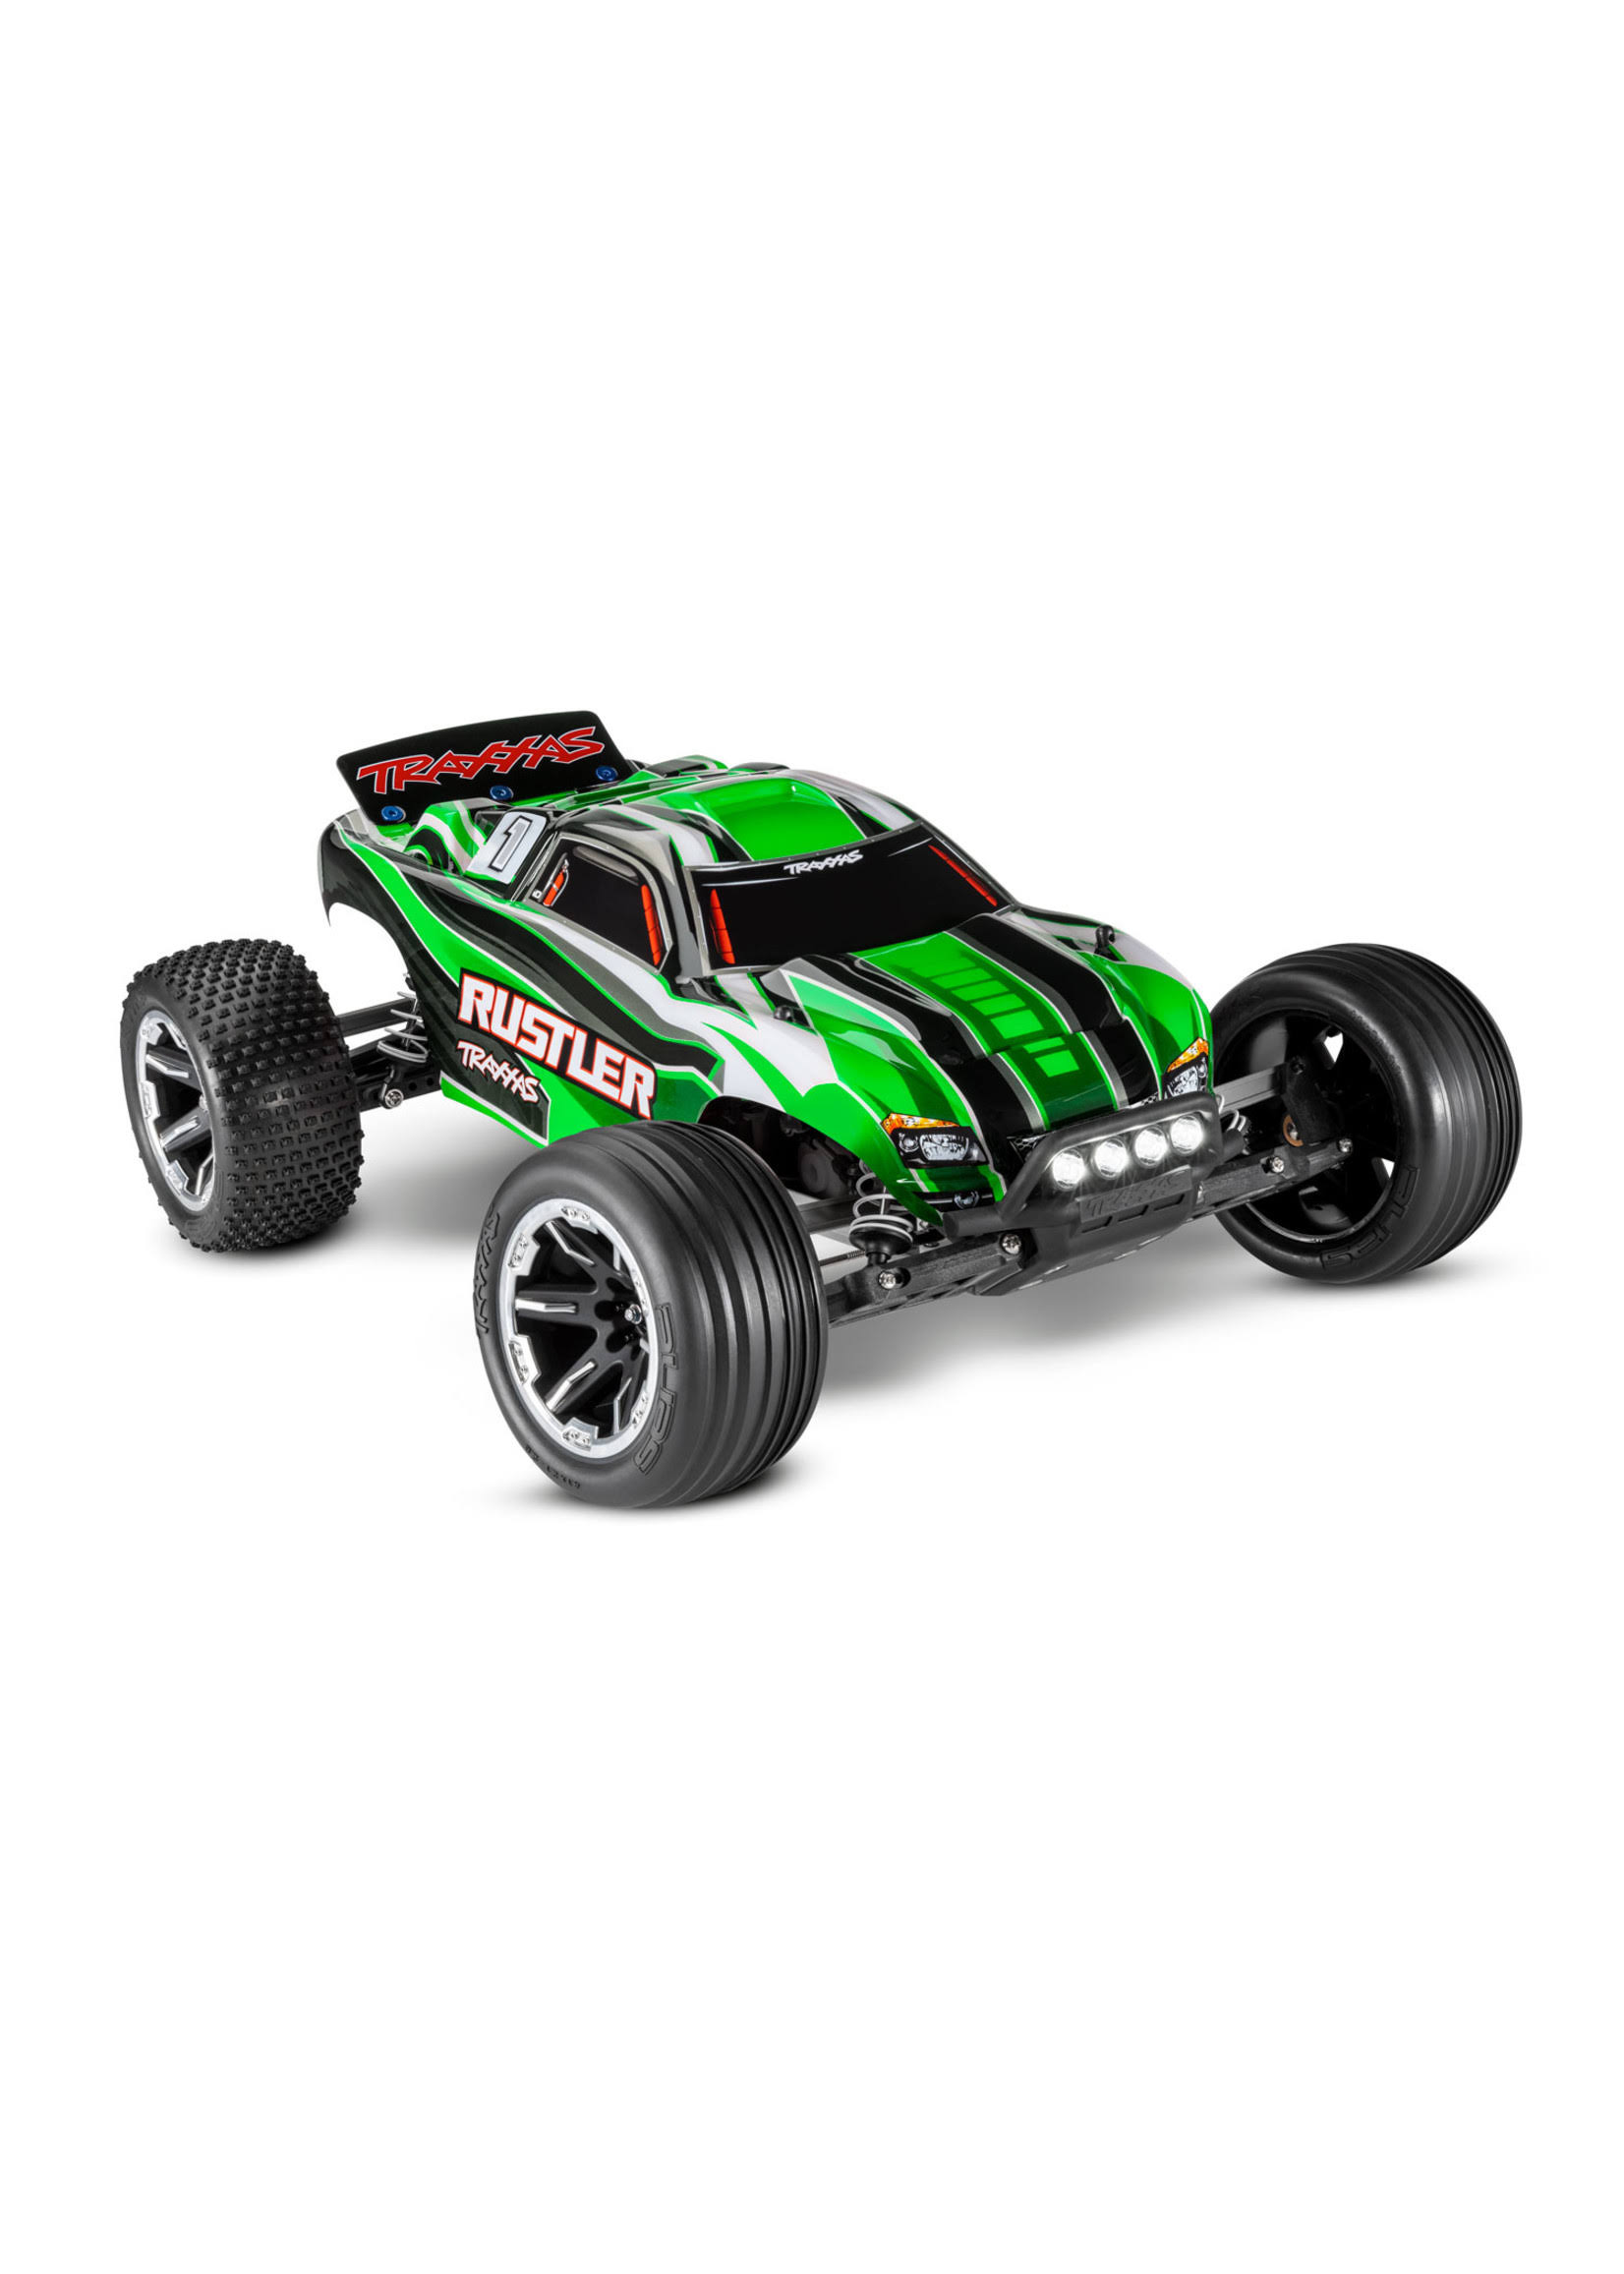 Traxxas Rustler 1/10 RTR with LED Lights, Battery and charger. Green